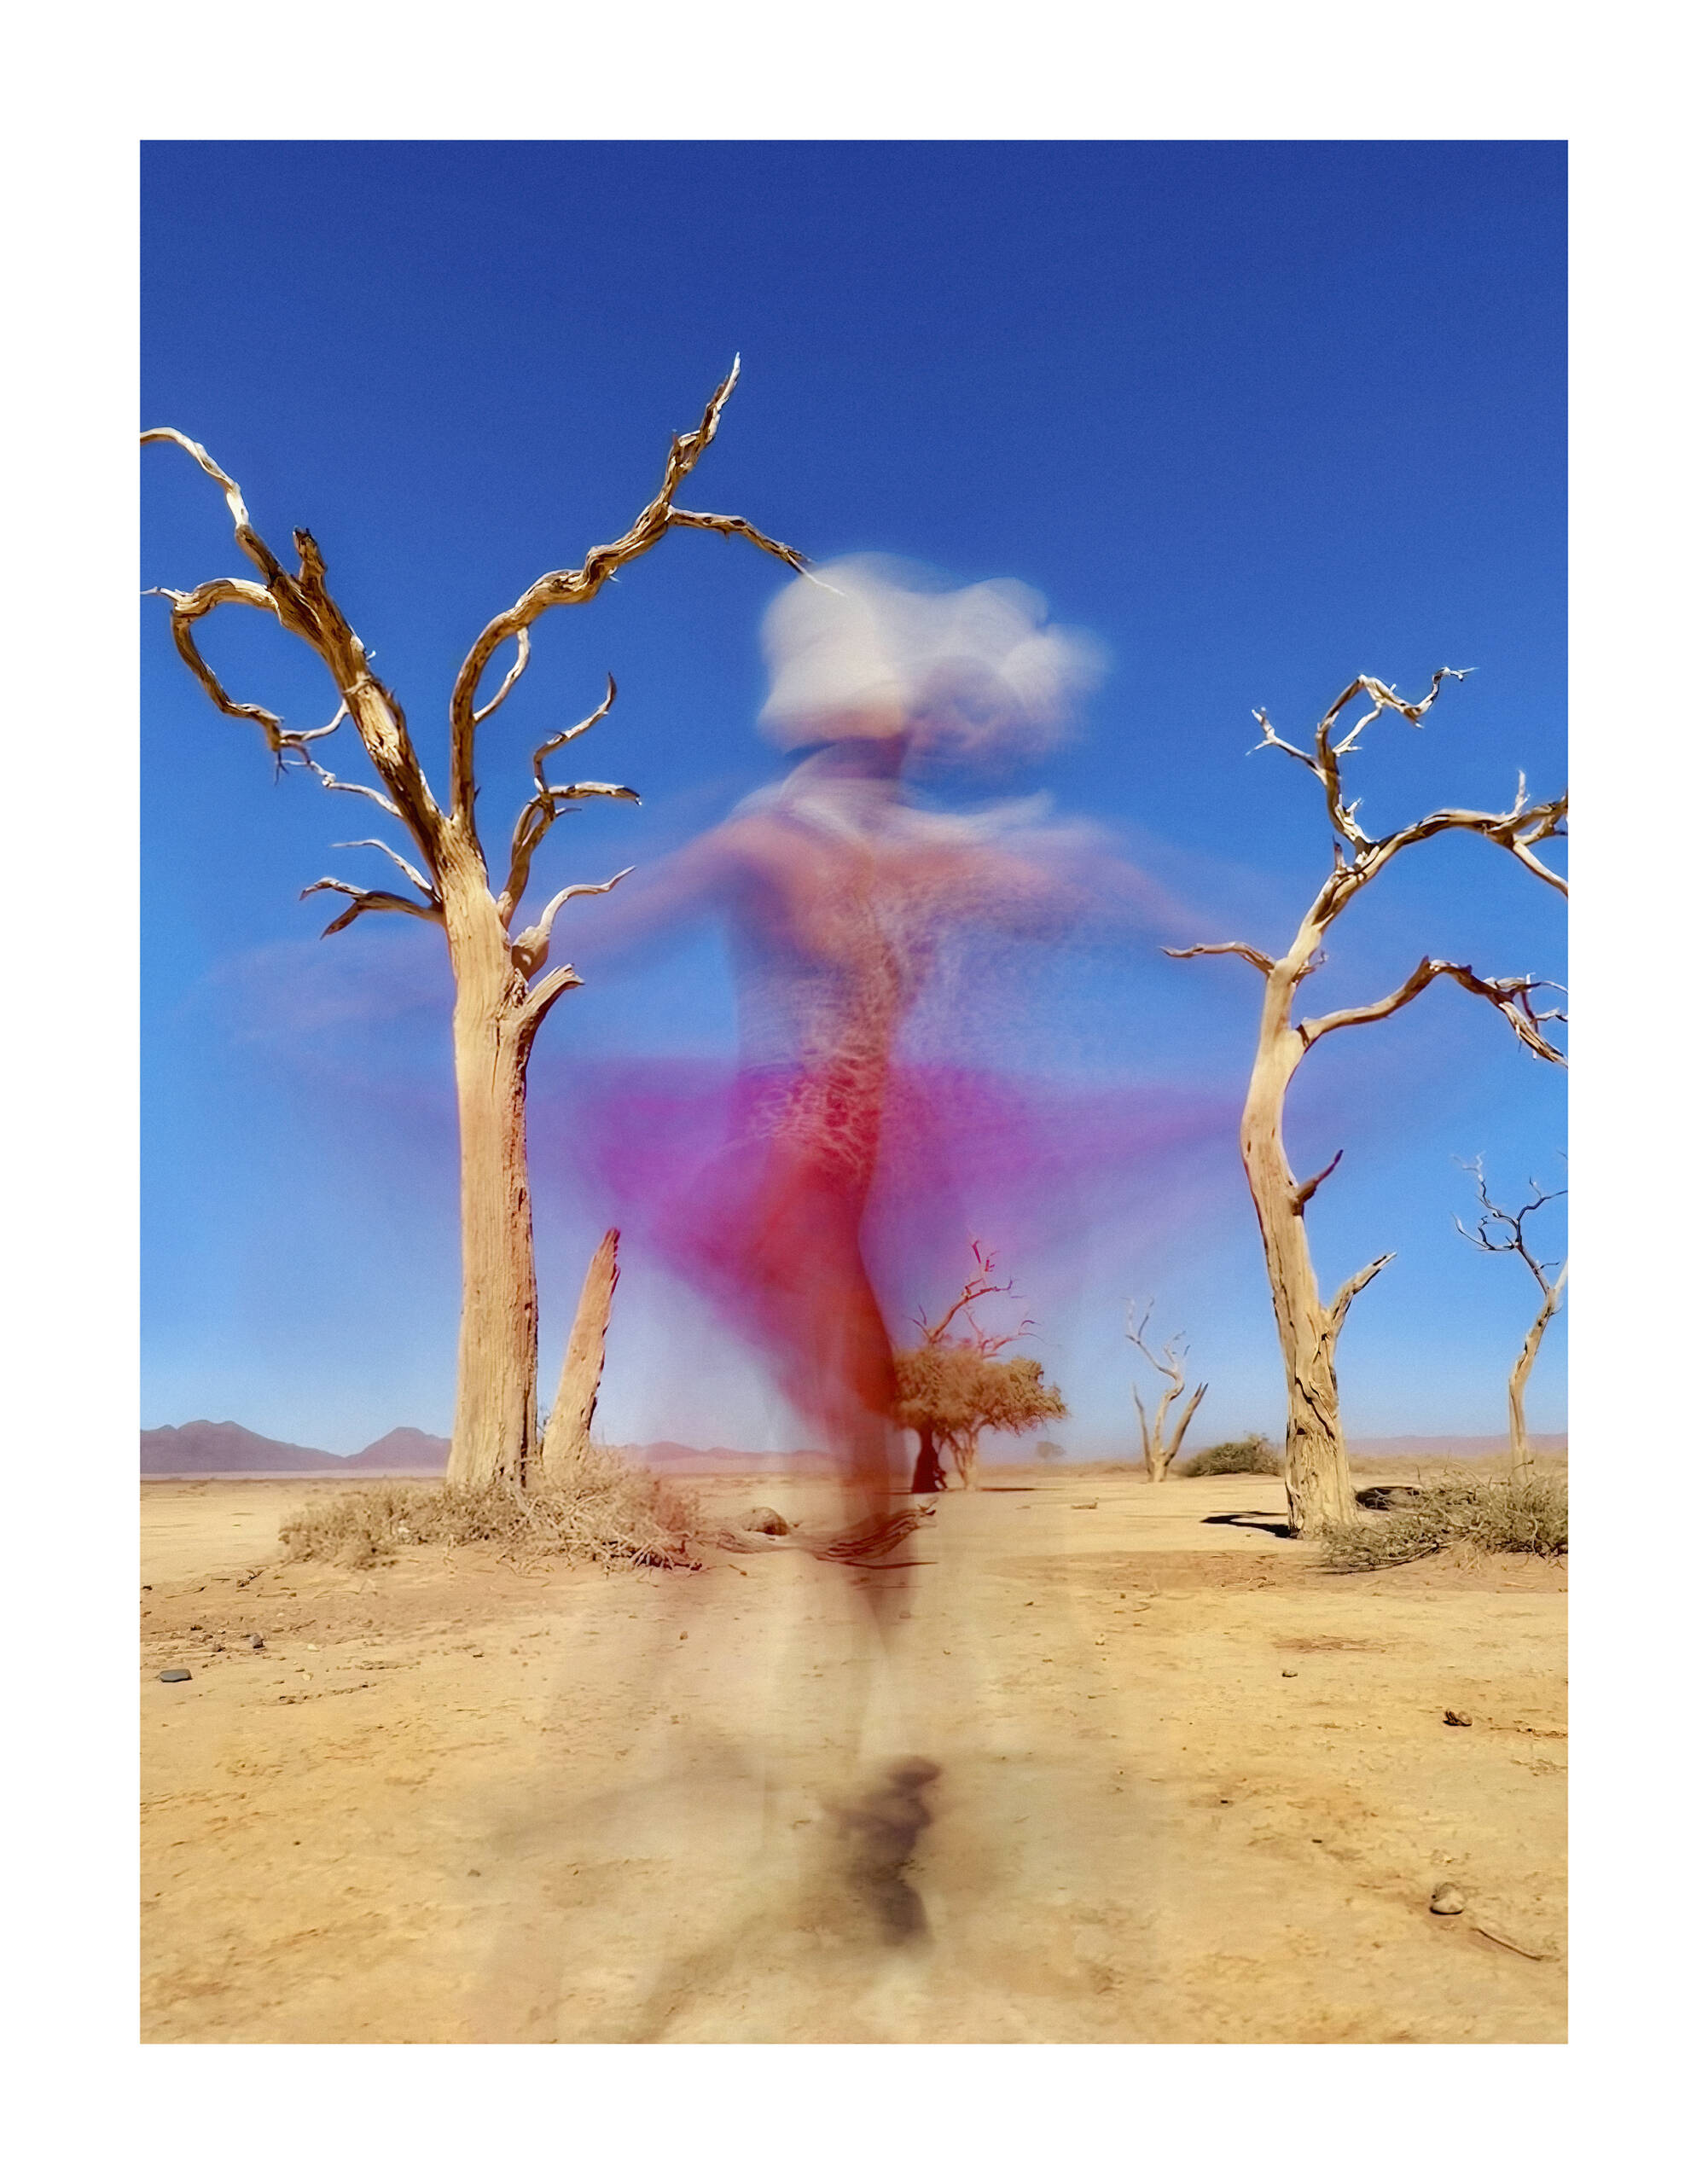 A woman in pink spinning against a bright blue sky with some trees